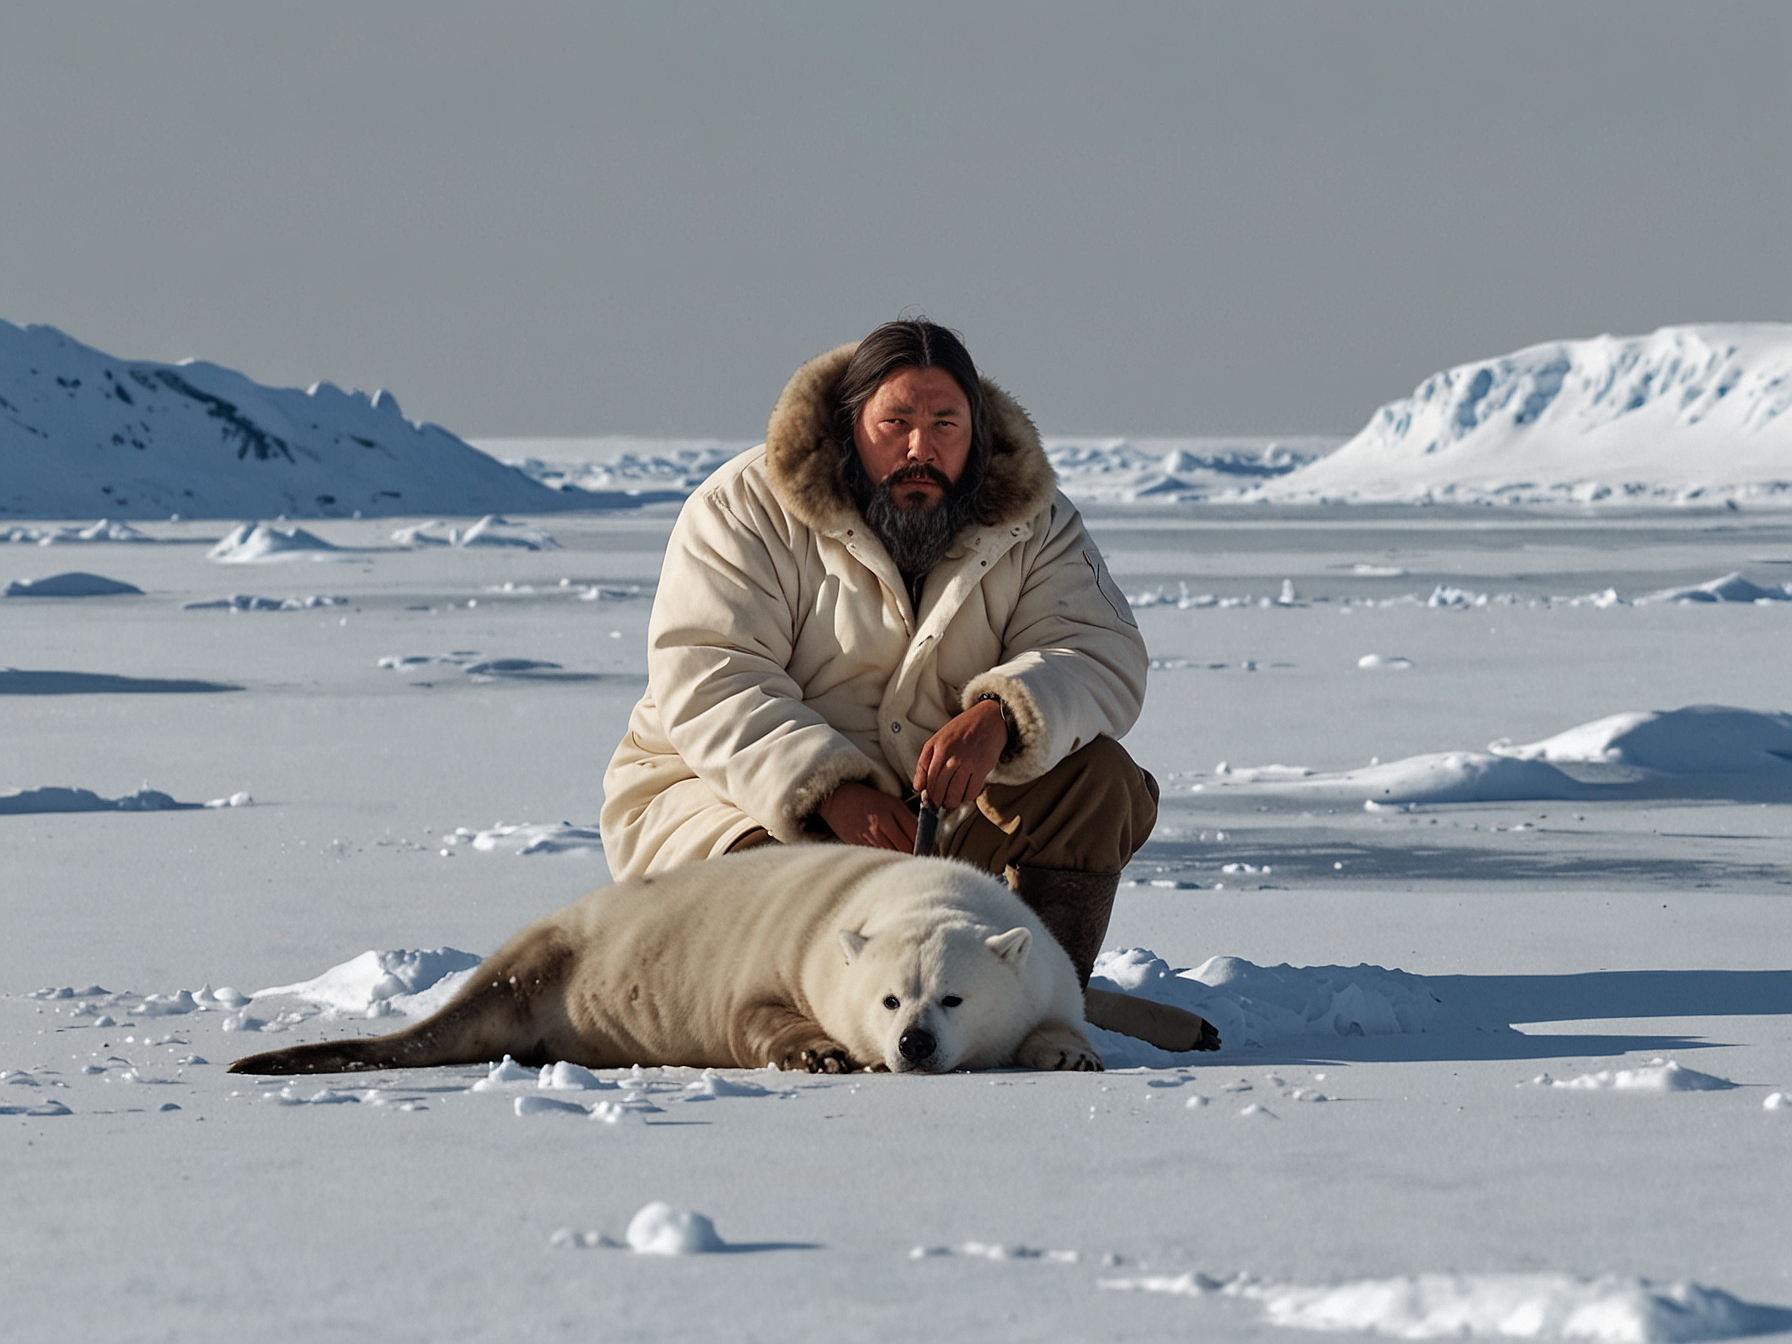 Hjelmer Hammeken, an Inuit hunter, dressed in white camouflage, lies on the snowy ice, patiently waiting near a seal's breathing hole, highlighting traditional Inuit hunting techniques.